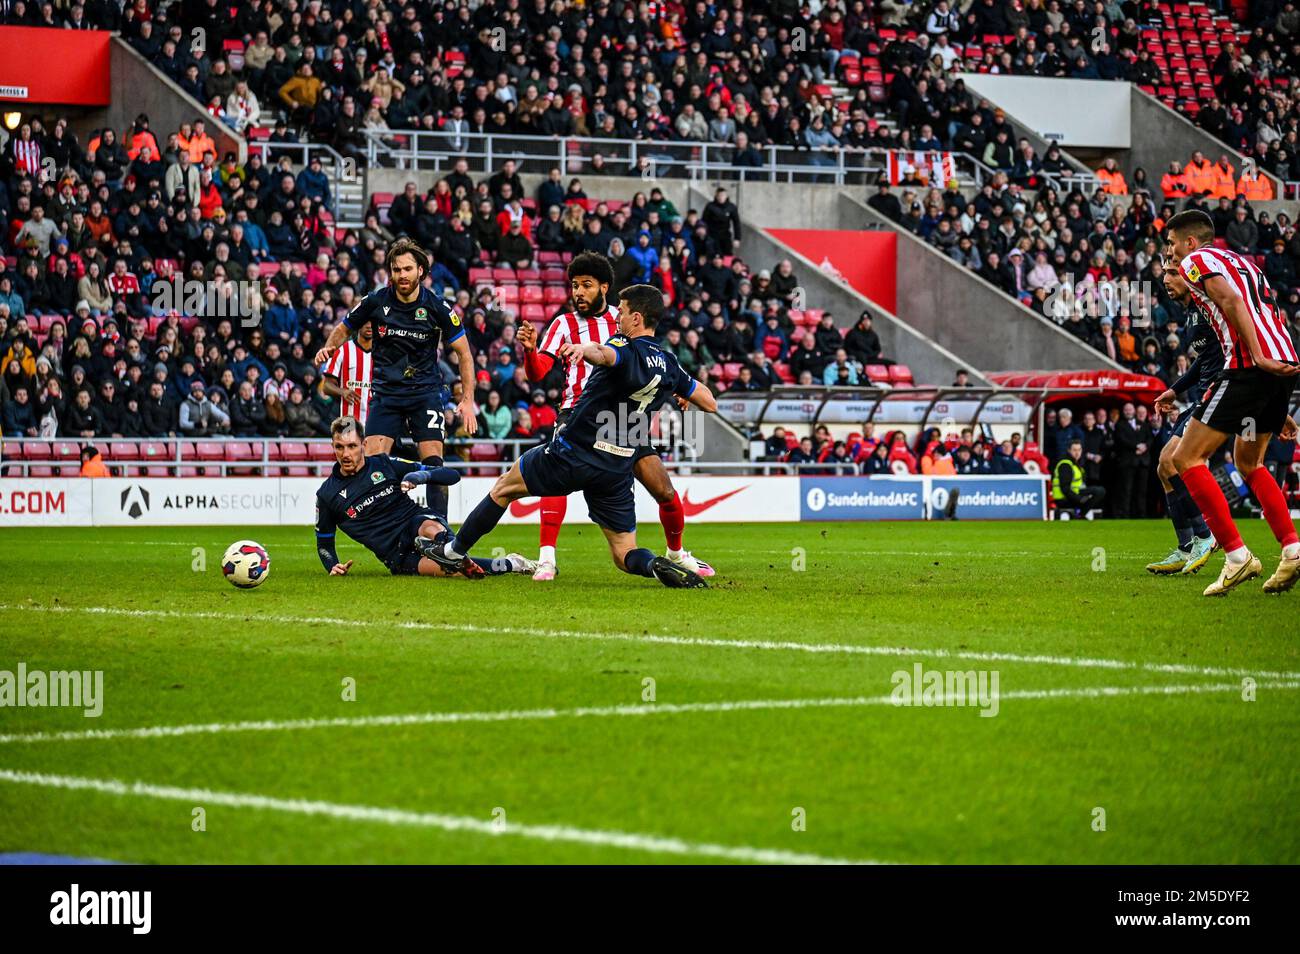 Sunderland AFC forward Ellis Simms (centre) scores a stoppage time winner against Blackburn Rovers in the EFL Championship. Stock Photo